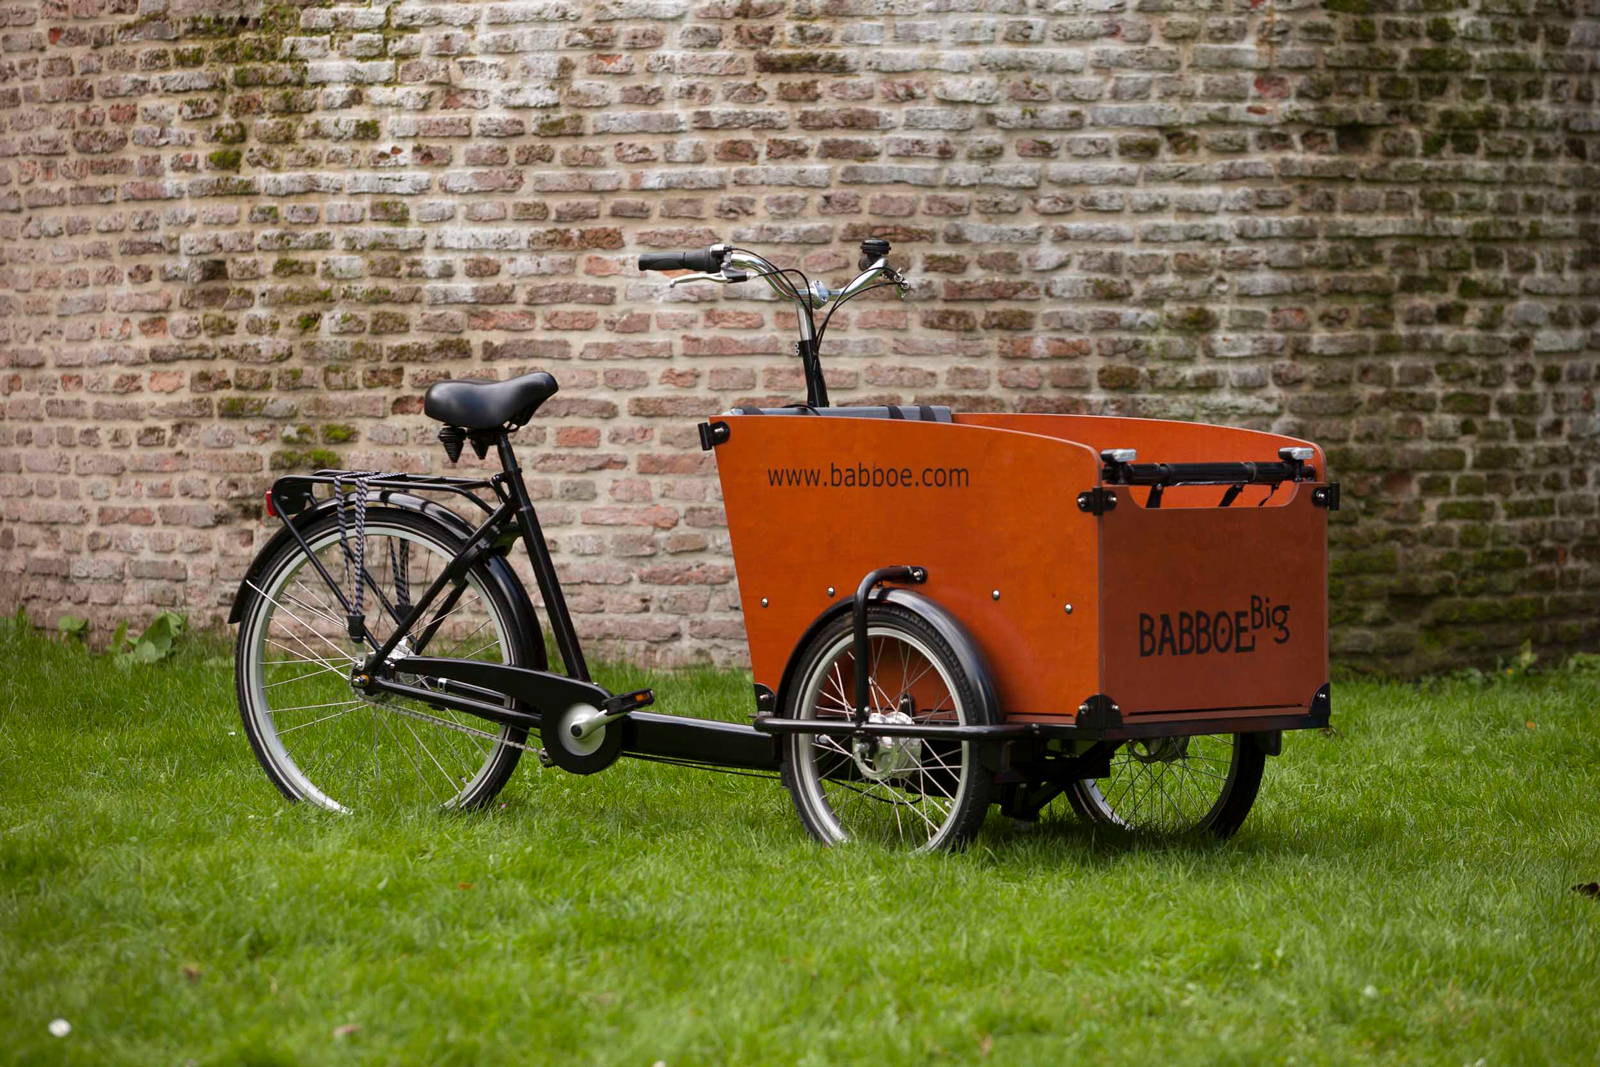 Babboe Big cargo bike stands against a brick wall on a grassy patch.